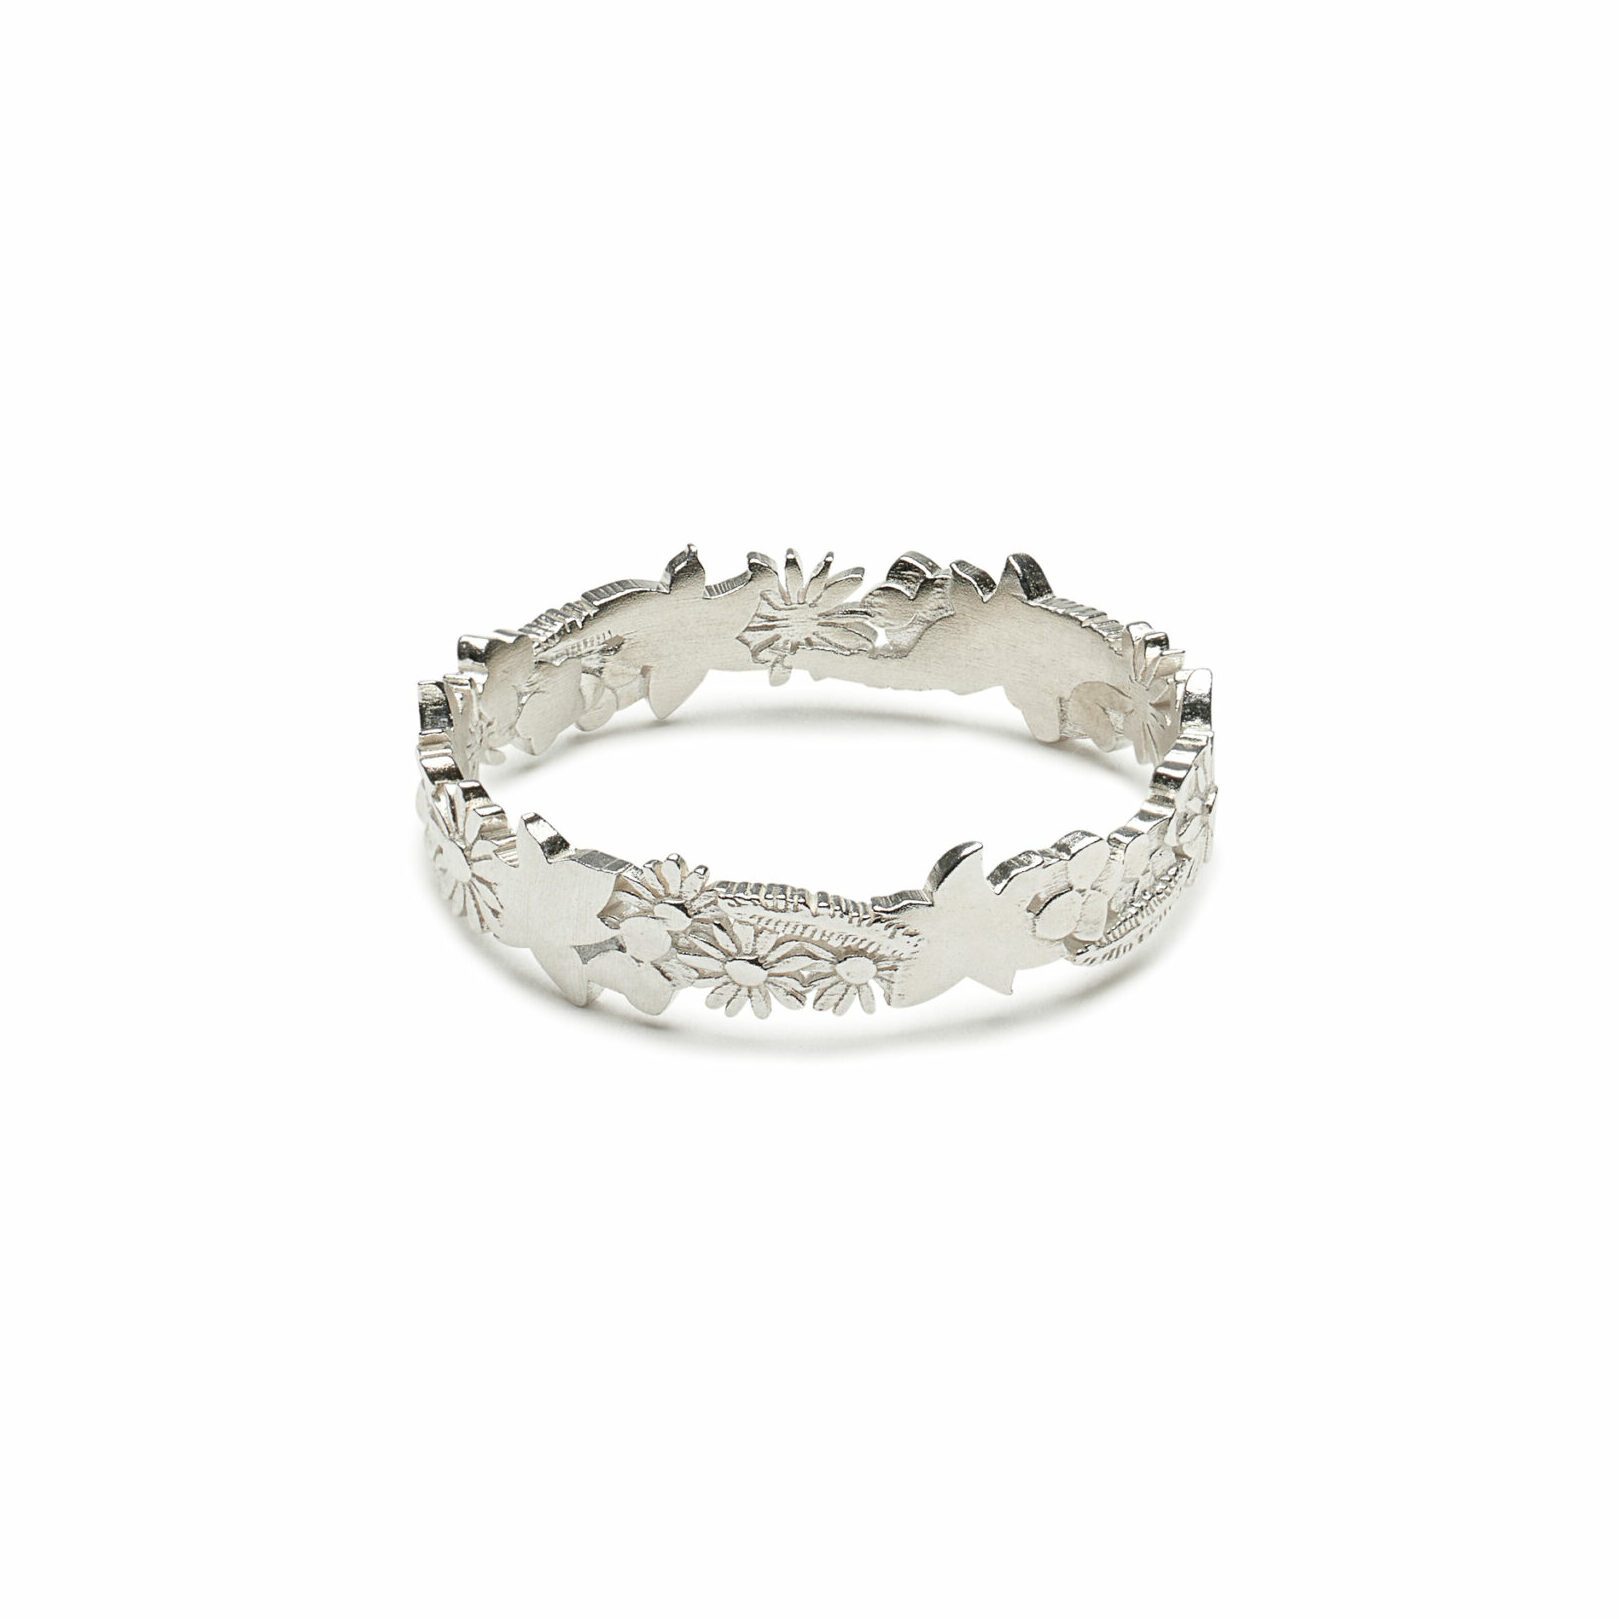 Ring depicting Vermont wildflowers in sterling silver